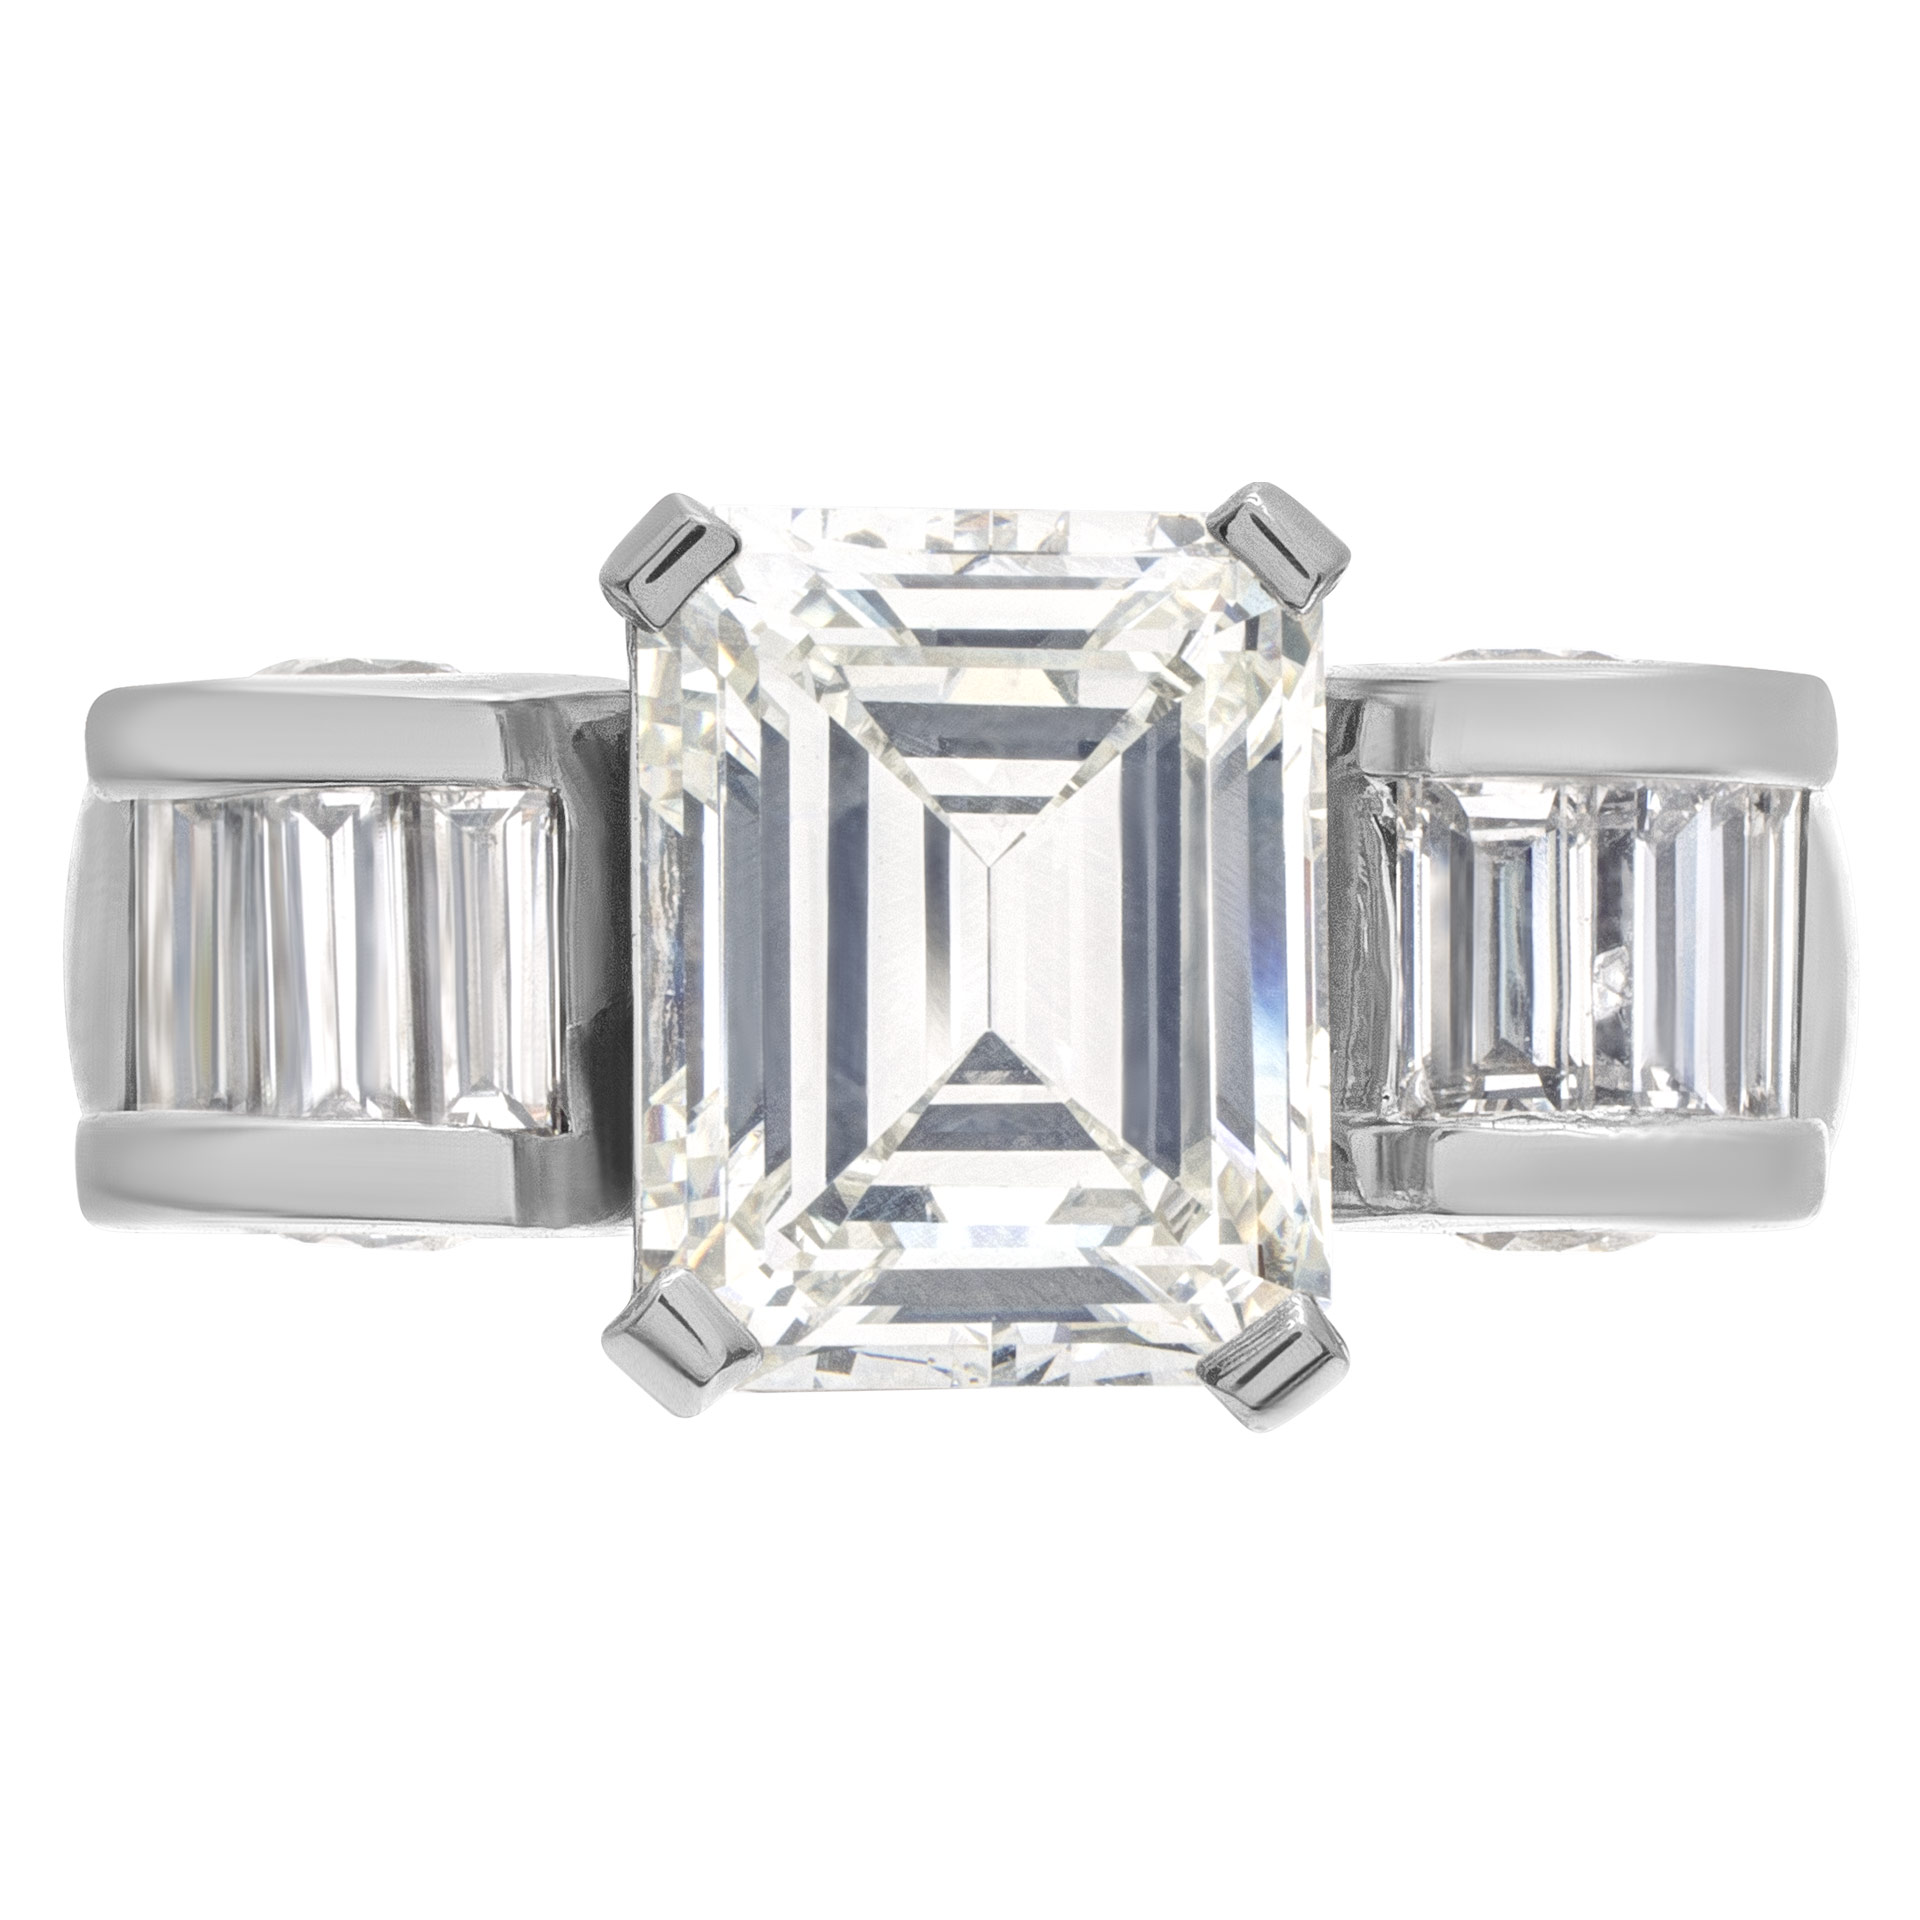 GIA certified Emerald cut 2.33 carat diamond (J color, VVS2 clarity) ring in platinum with 2 tapered